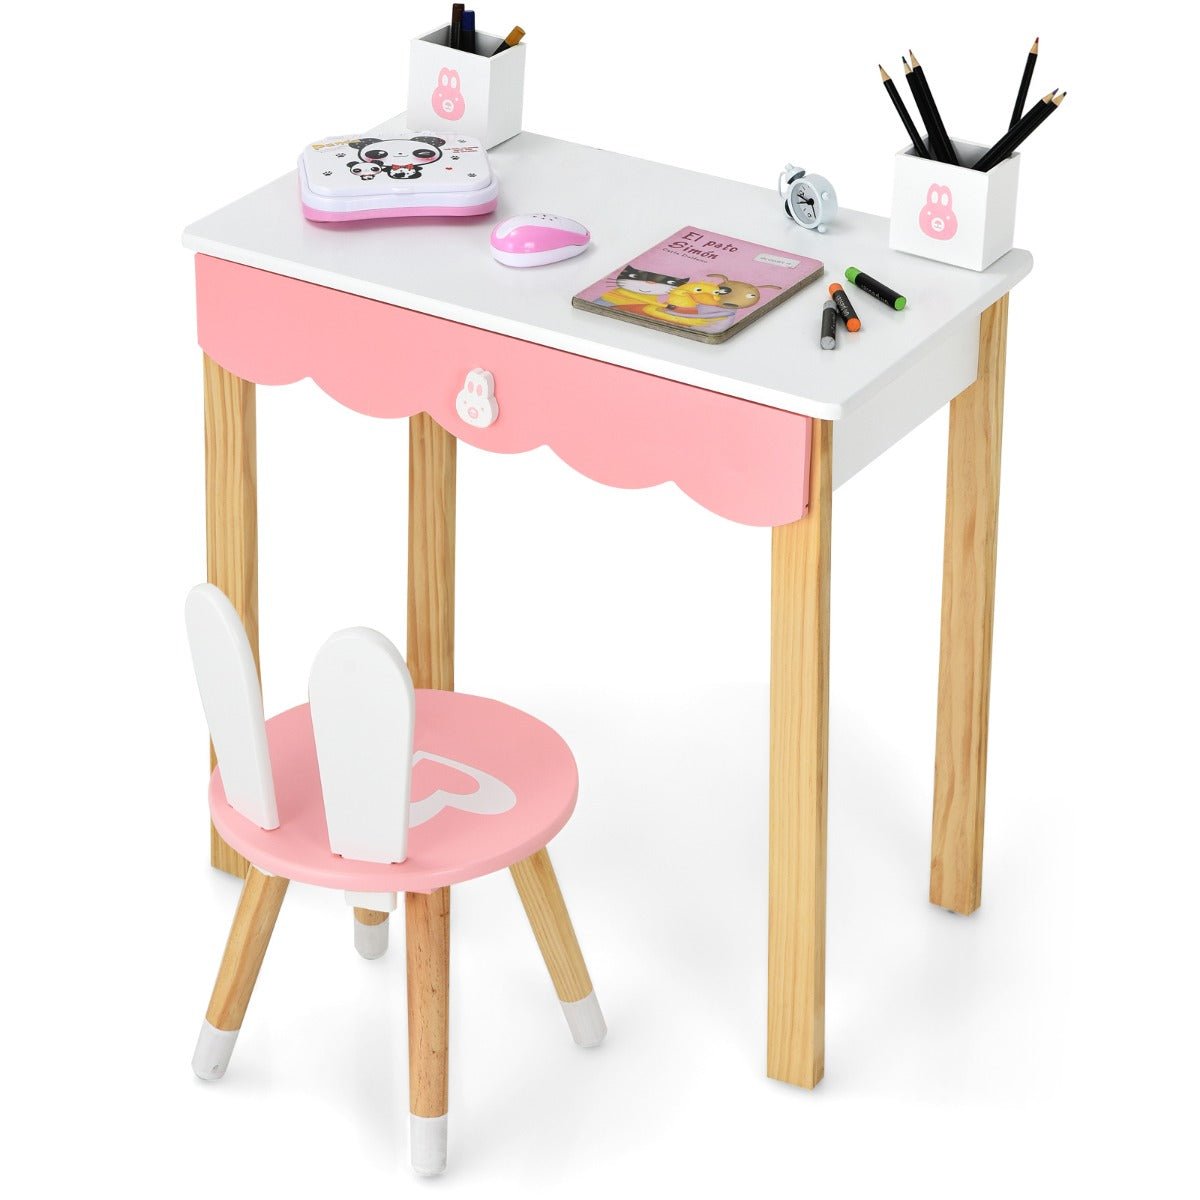 Kids Vanity Table & Chair Set - Rabbit Mirror & Drawer, Ideal for Playtime